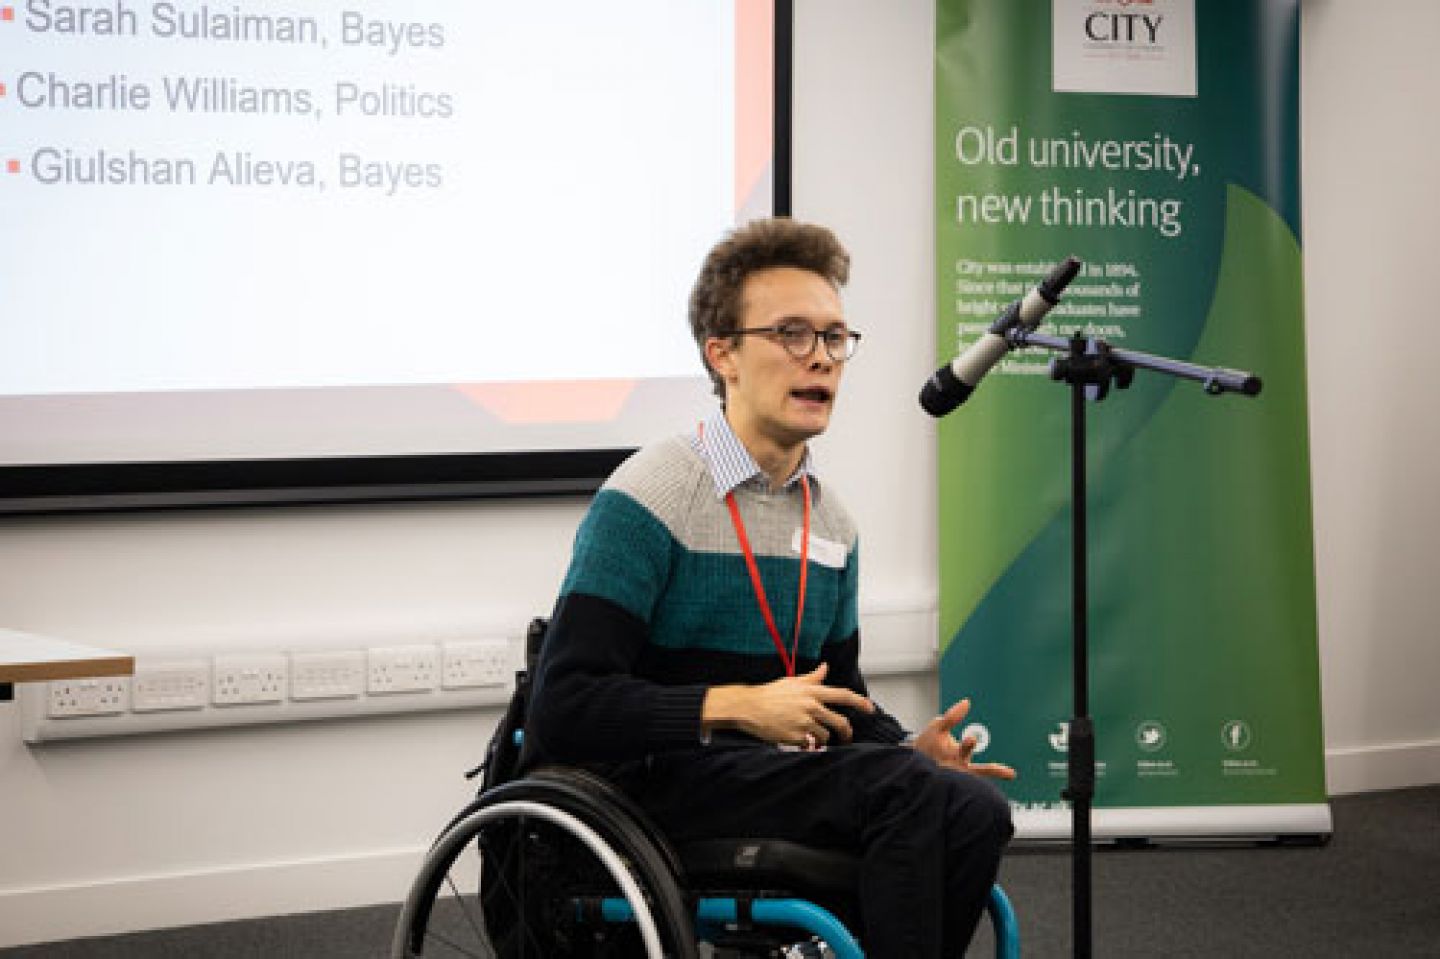 Student speaker and wheelchair user Charlie Williams delivers his speech